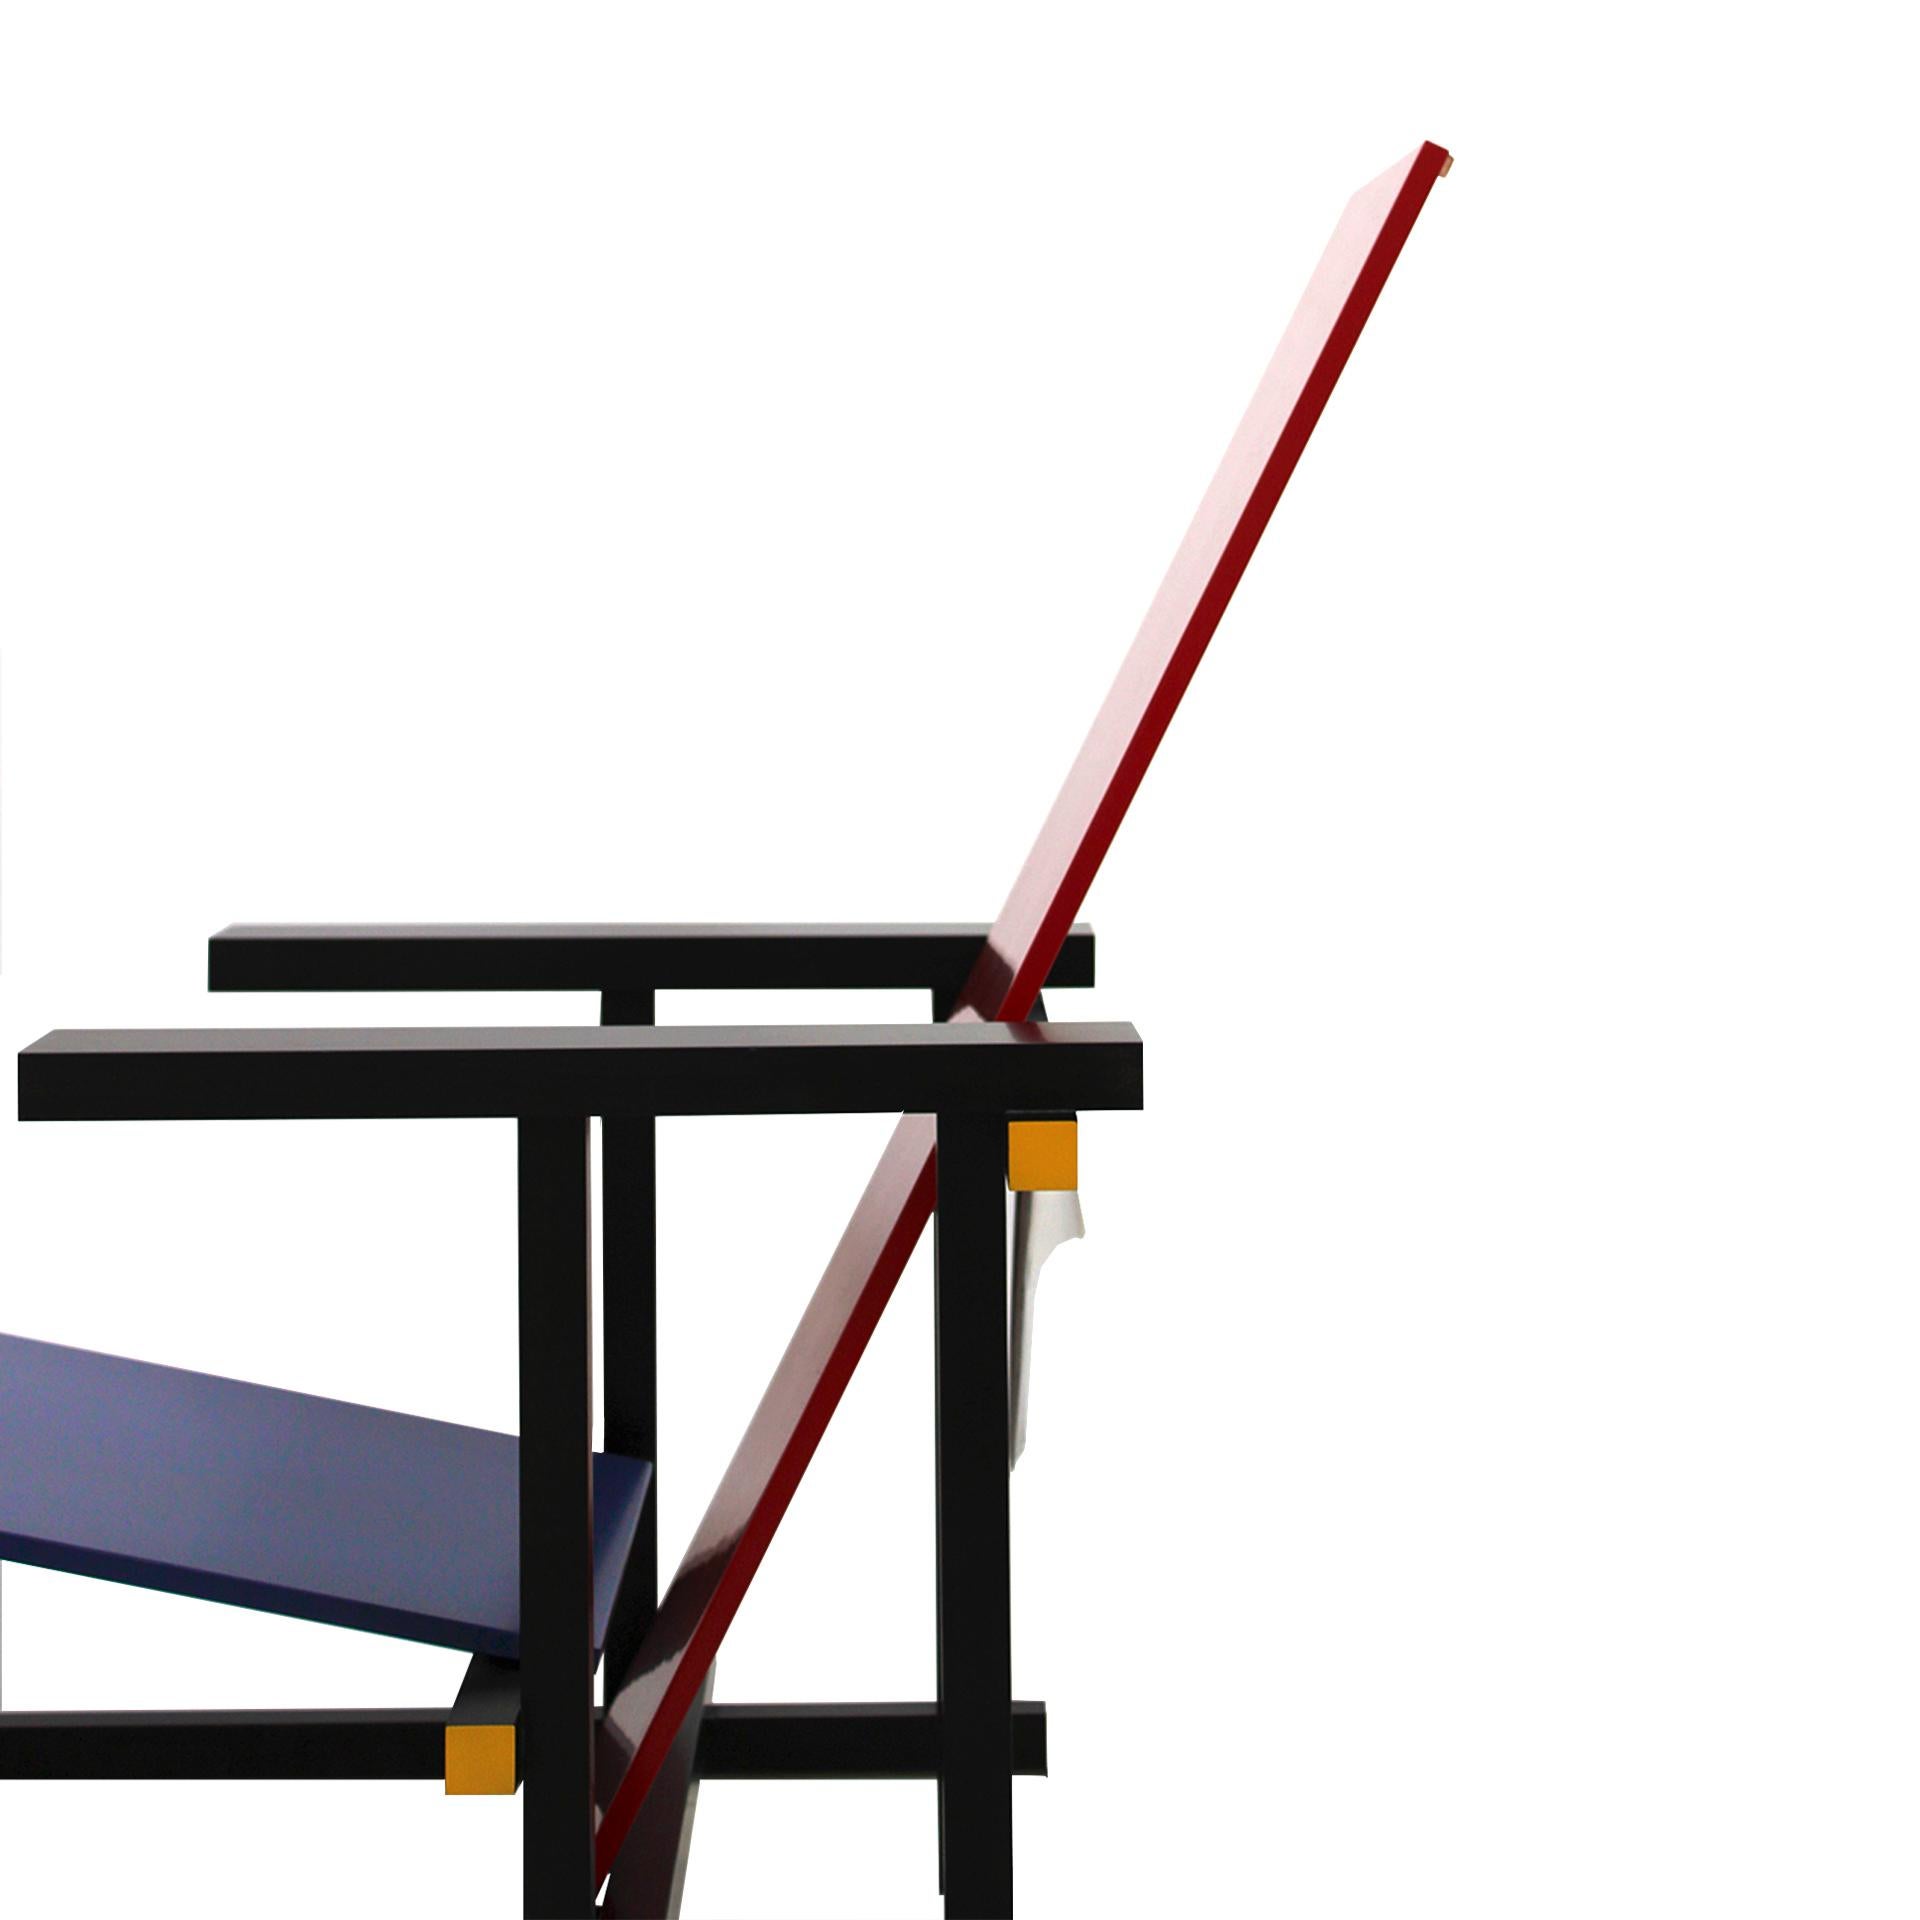 Dutch Red and Blue Chair Designed by Gerrit T. Rietveld for Cassina